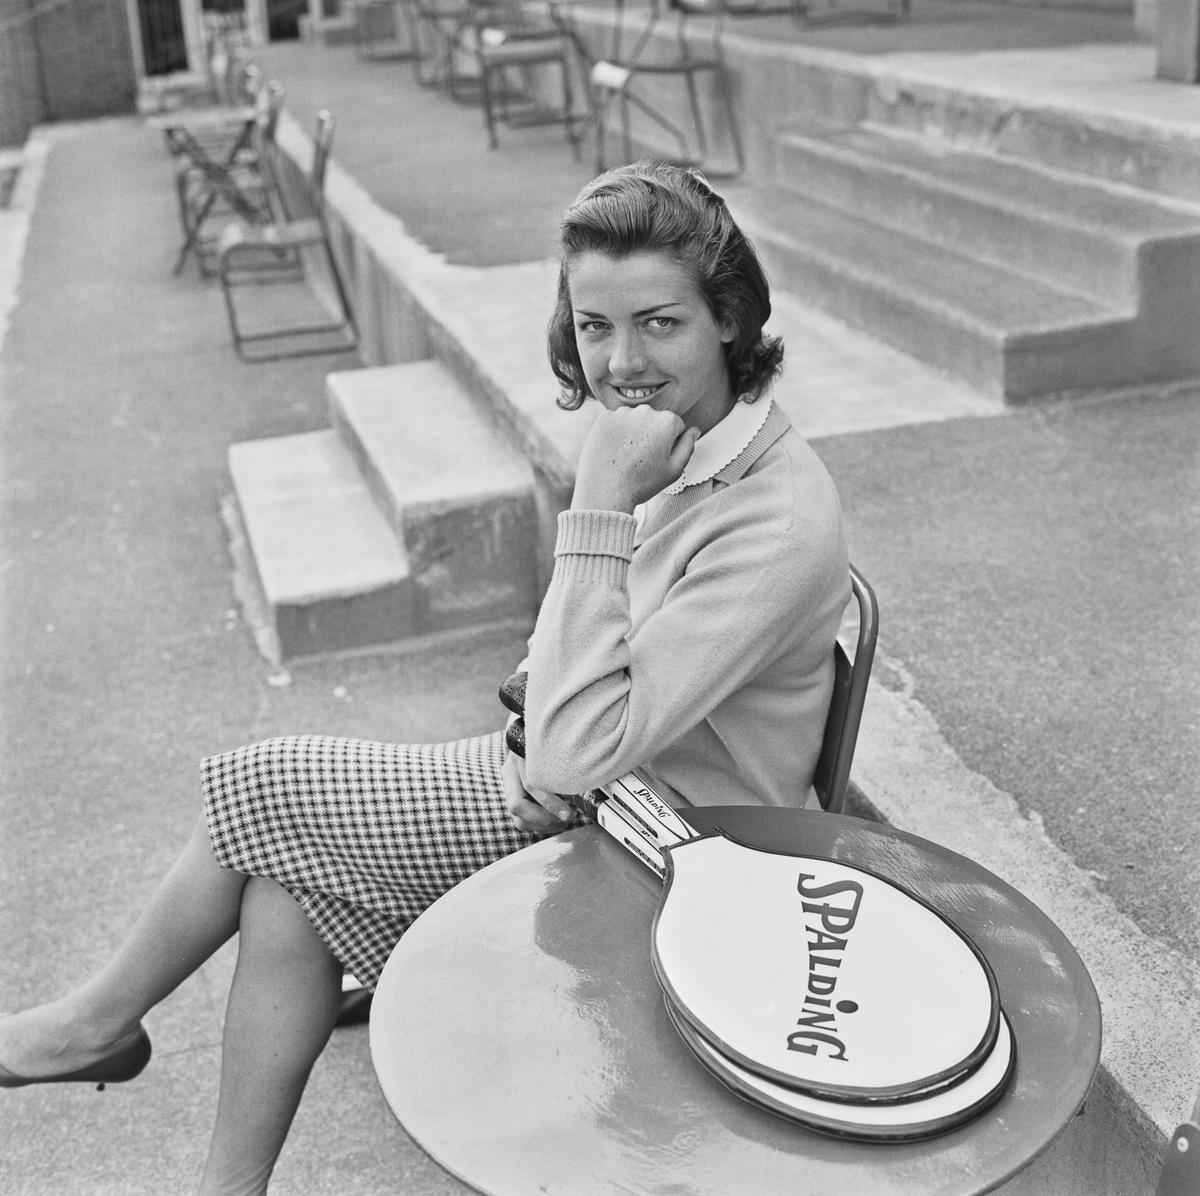 Australian tennis player Margaret Smith (later Court) with a Spalding racket at the Wimbledon Championships in London, UK, 24th June 1963. She went on to win the Women’s Singles that year. 